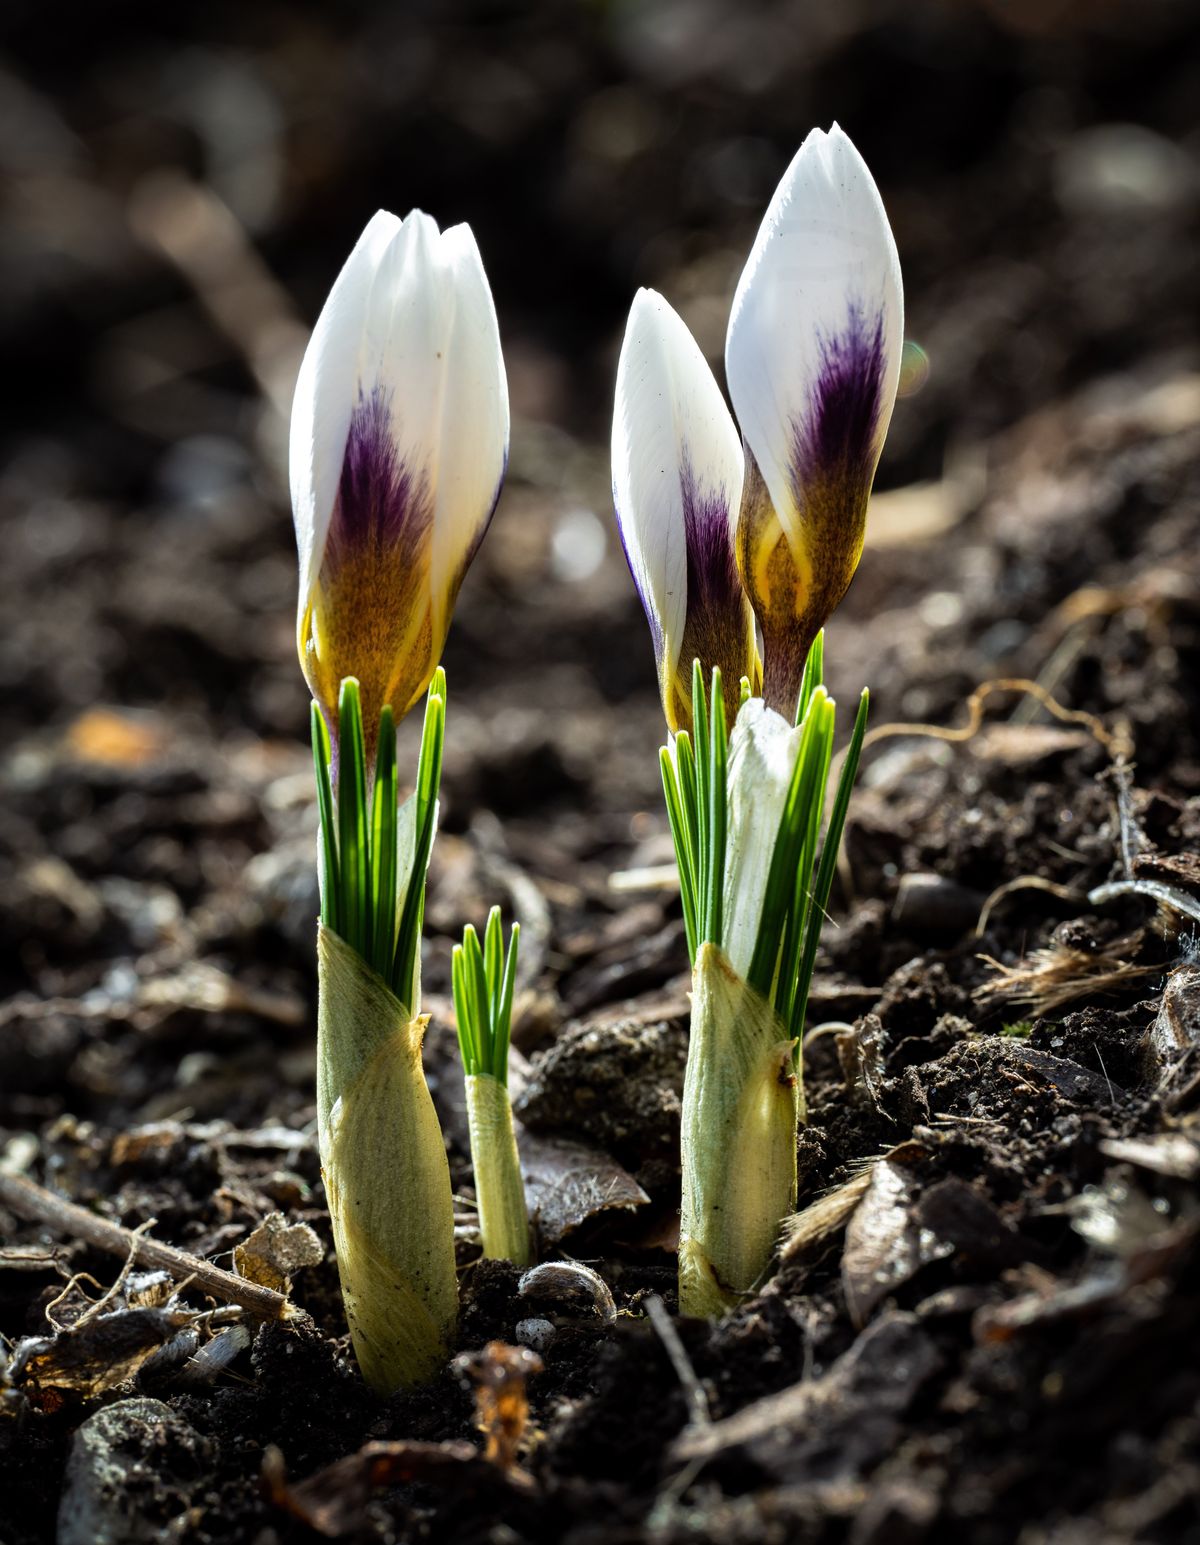 With warming spring weather, crocuses are emerging from their winter slumber like these Tuesday in a front yard on Spokane’s South Hill.  (COLIN MULVANY/THE SPOKESMAN-REVIEW)